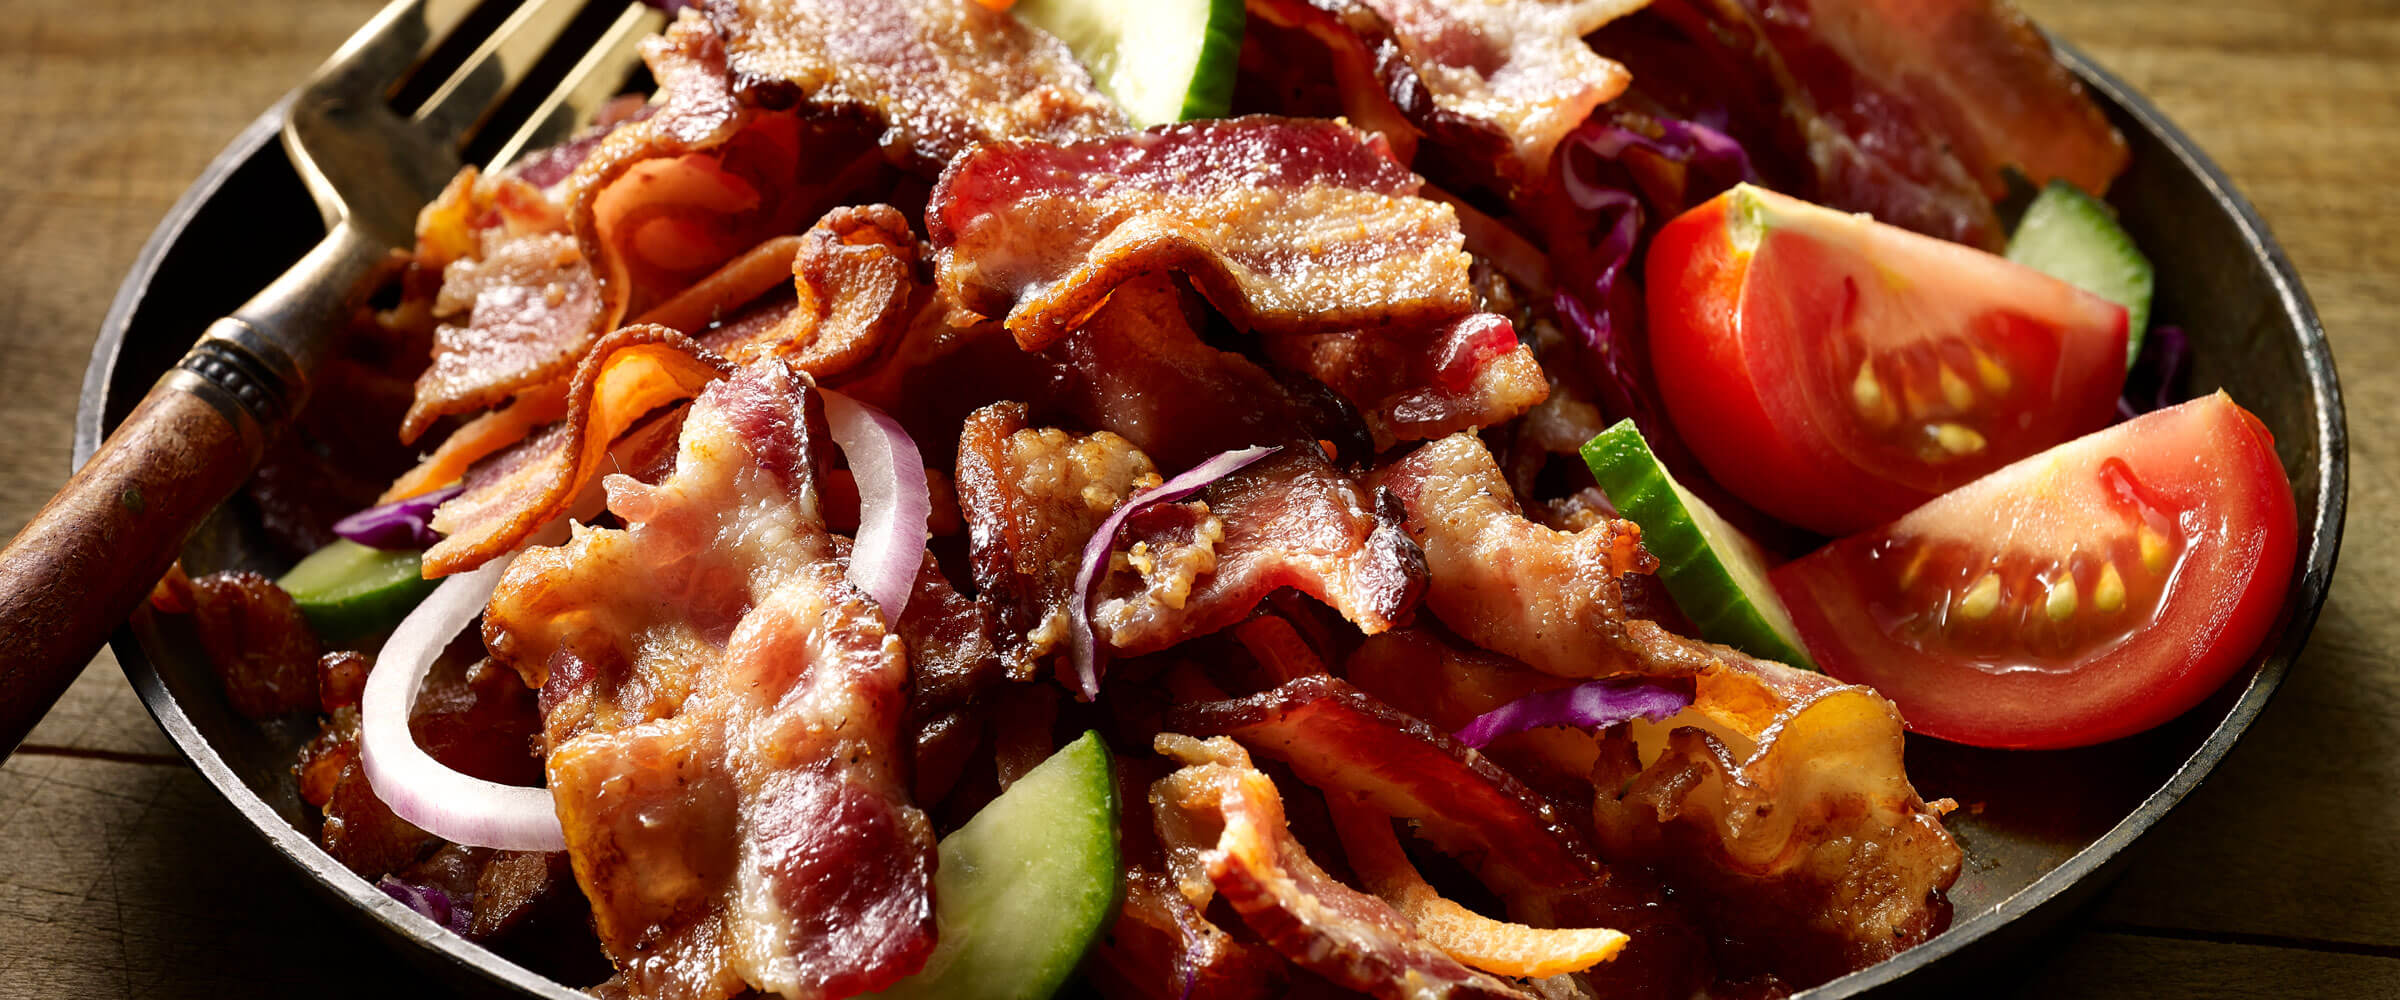 Bacon Garden Salad with tomatoes and cucumber